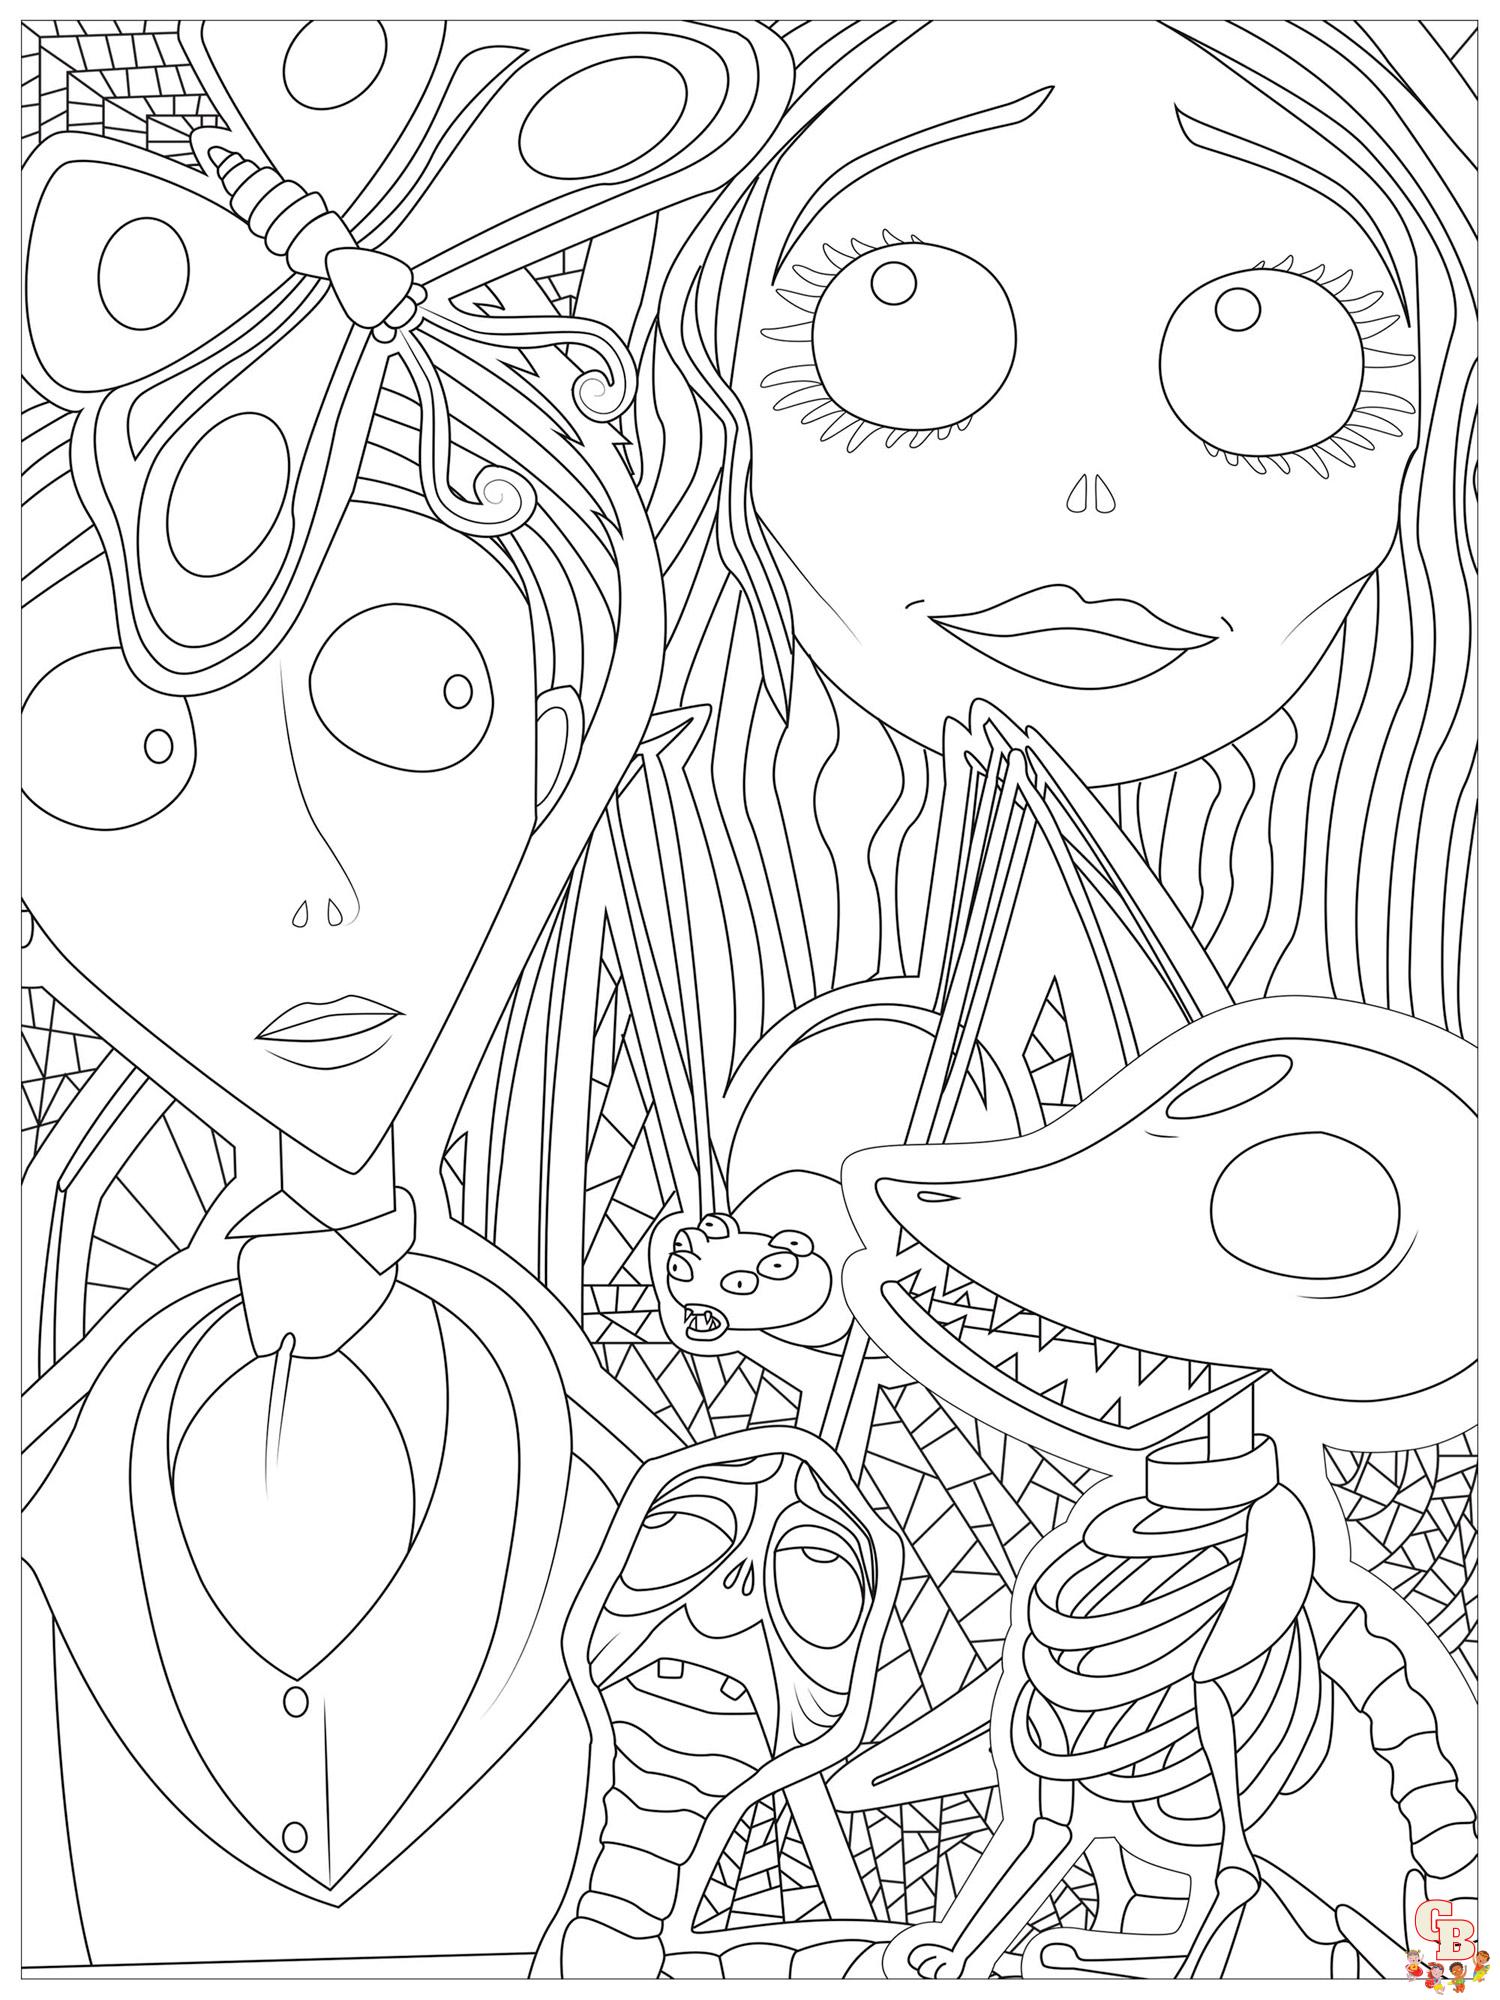 Corpse Bride Coloring Pages 1